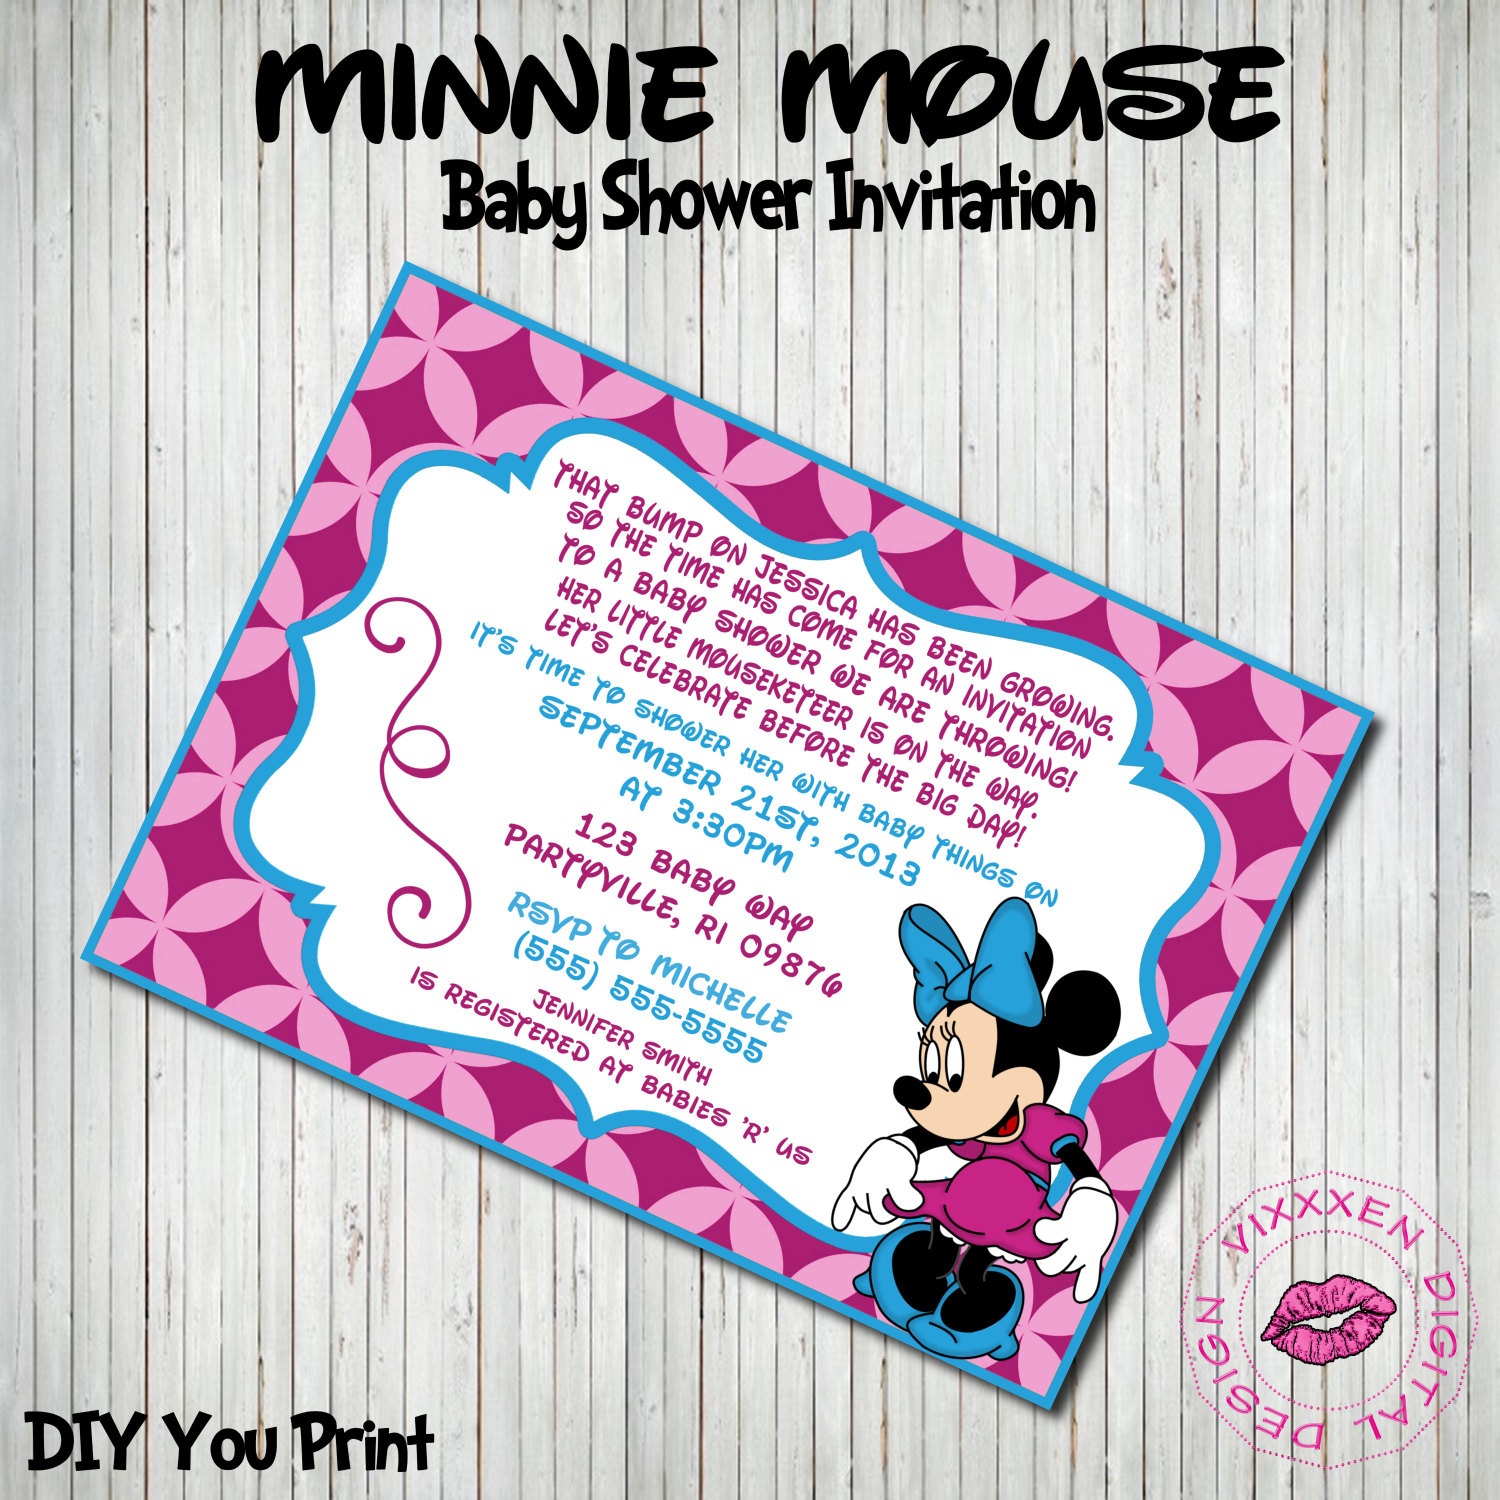 Photo : Make Your Own Minnie Mouse Image - Free Printable Minnie Mouse Baby Shower Invitations